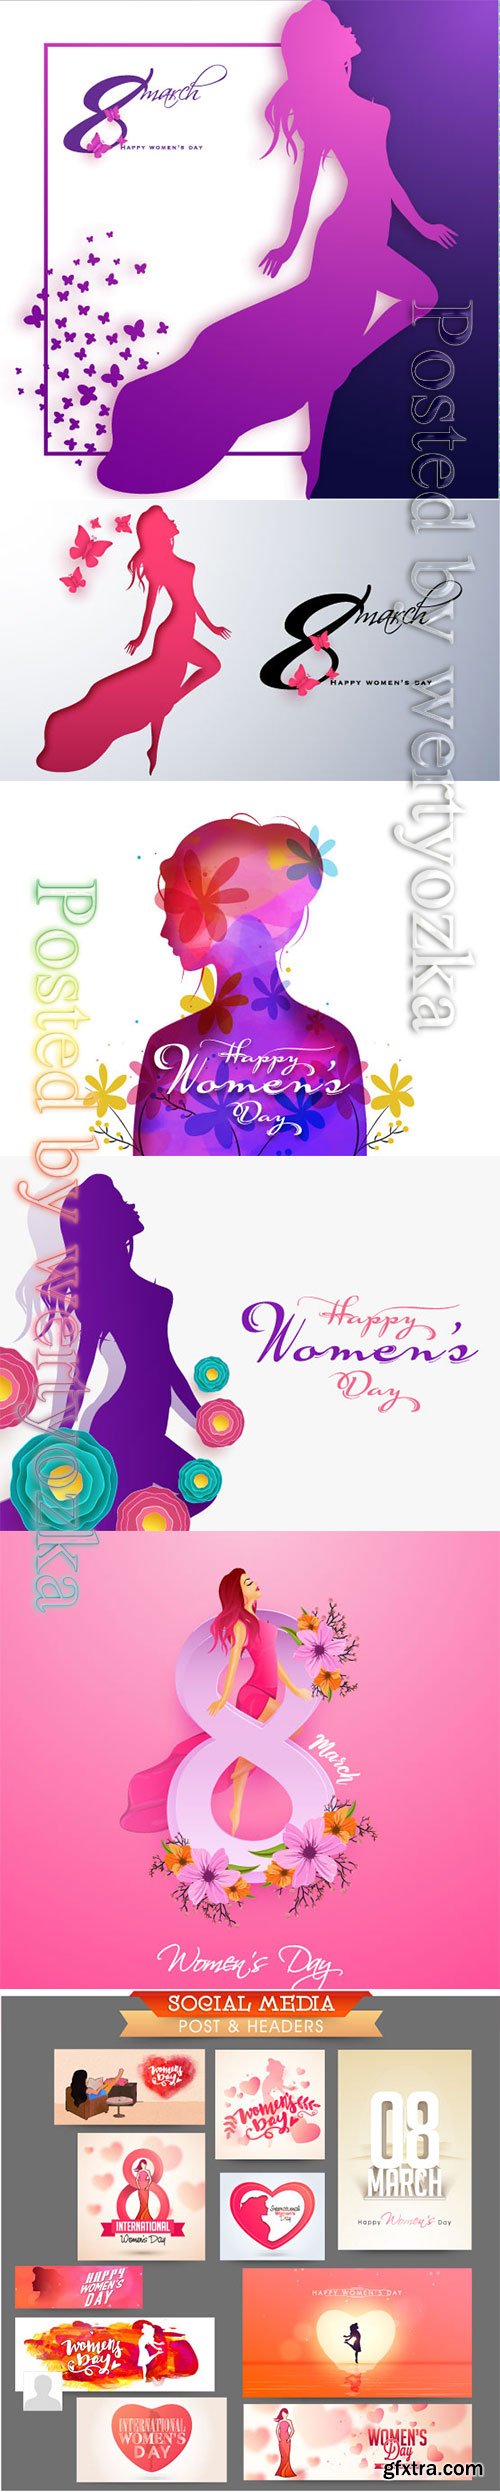 Happy Women\'s Day greeting card design with beautiful lady